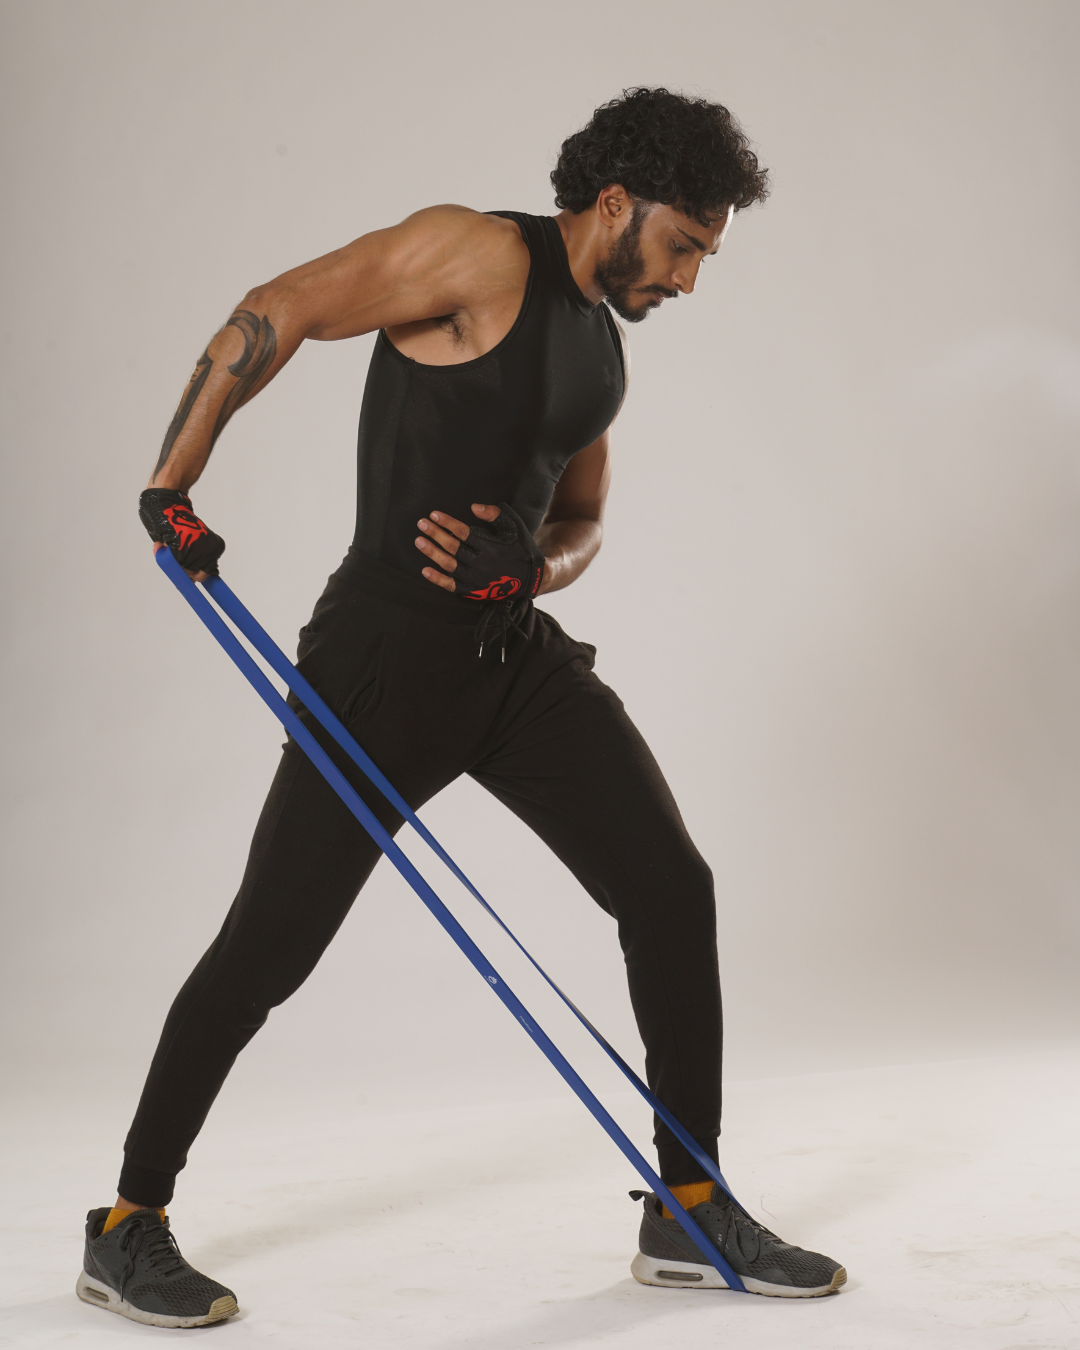 Resistance Bands for Stretching, Strength Training and Pull Up Assist - Burnlab.Co